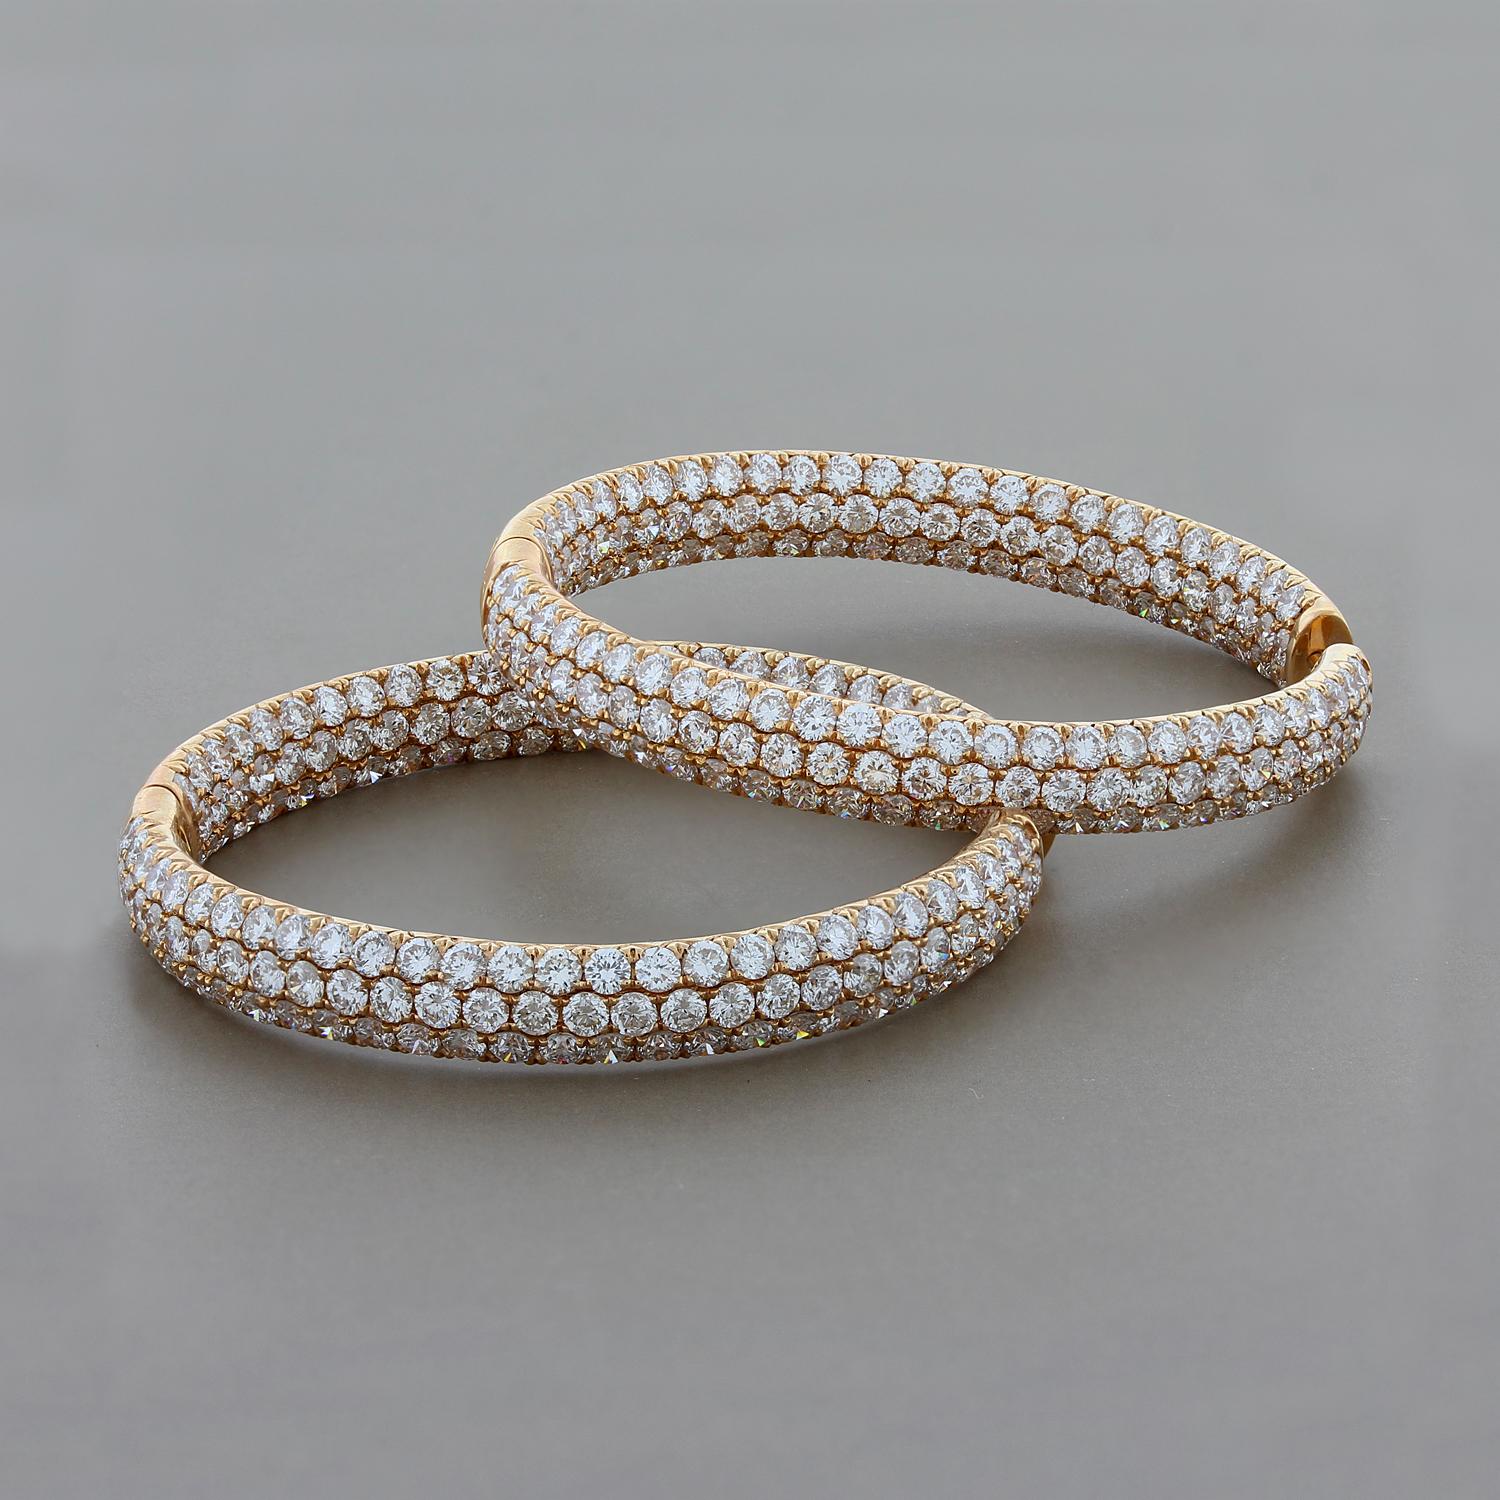 This pair of elegant and sophisticated hoop earrings feature 9.50 carats of round cut VS quality pave set diamonds. The diamonds are top quality white diamonds and shine from every angle.  As an added bonus the diamonds are set inside the hoops for